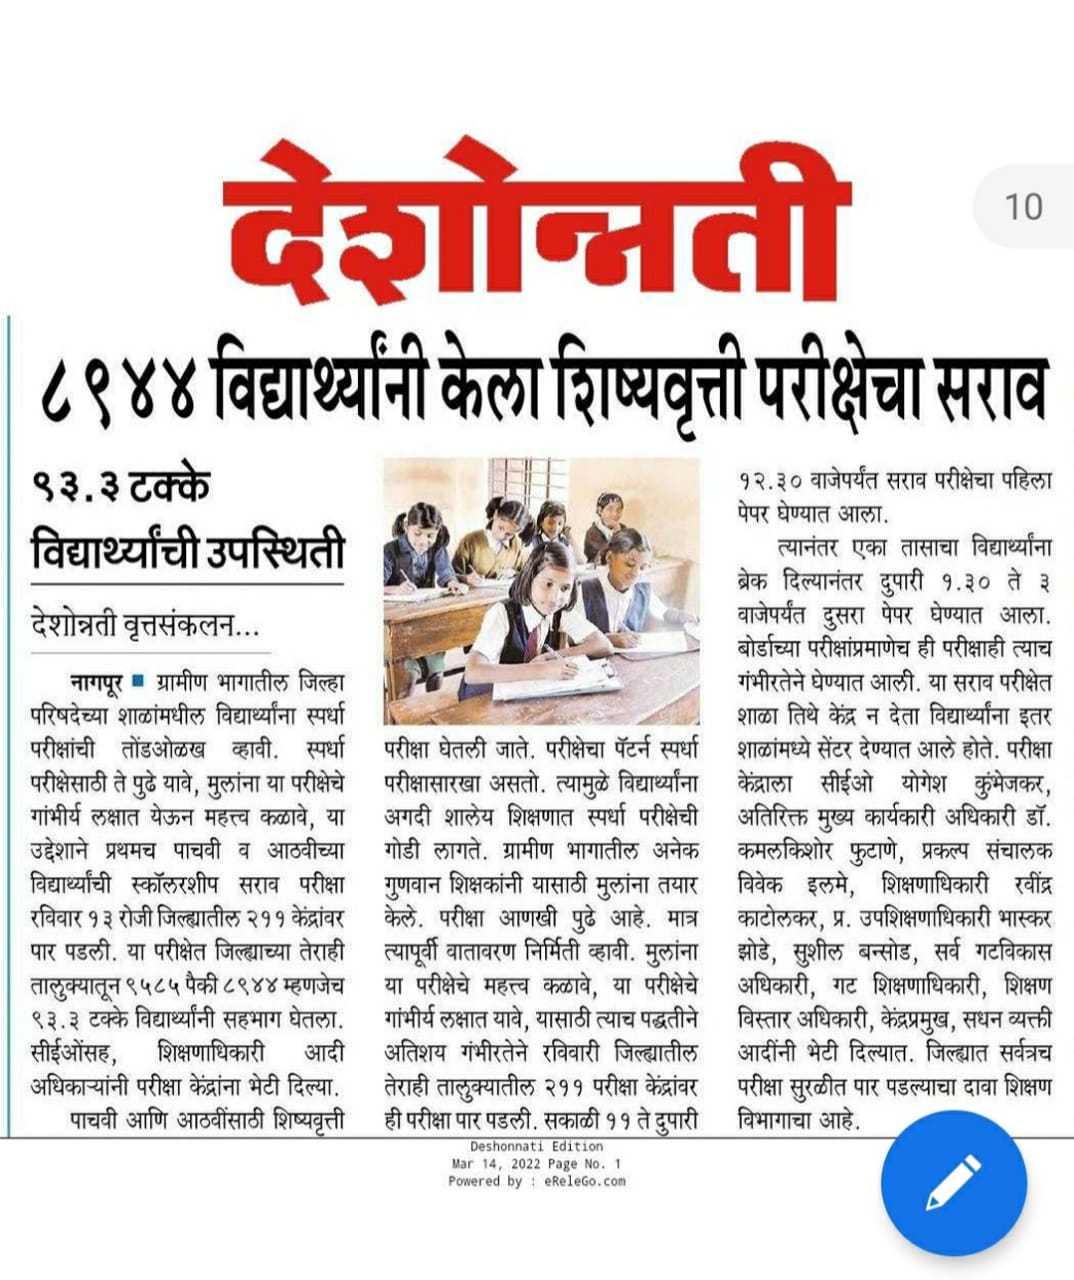 'Semi-trial' of competitive examination of over eight thousand students in Z.P. Nagpur's innovative venture